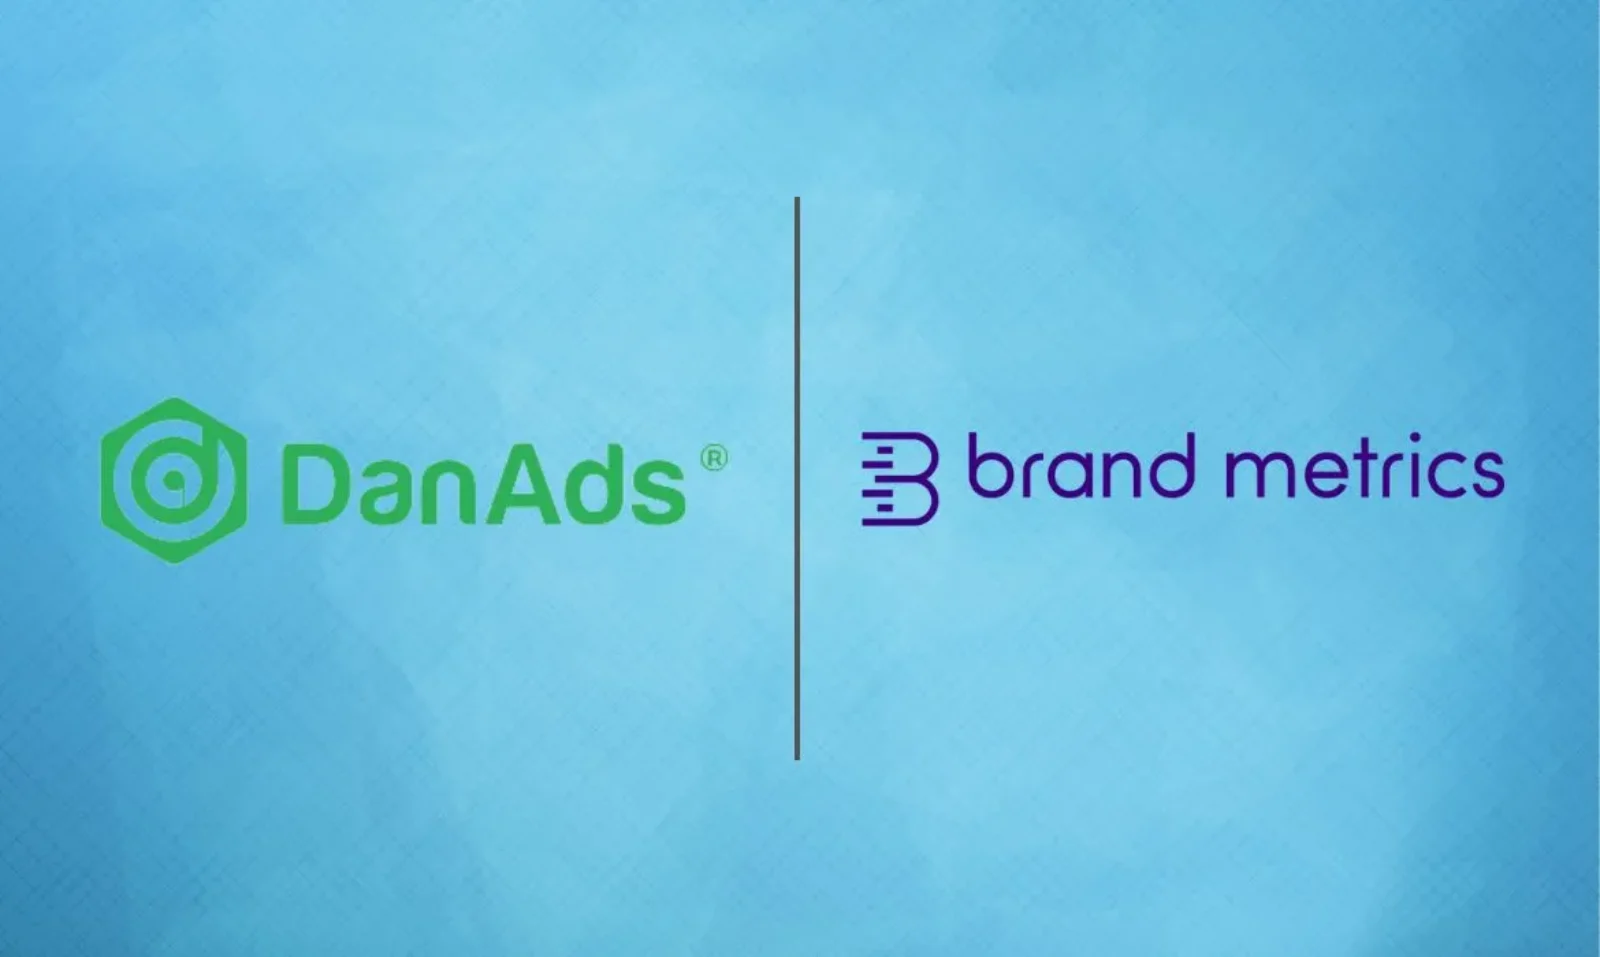 DanAds, Brand Metrics, advertising technology, self-serve platform, brand lift data, advertising ROI, media industry, publishers, advertisers, campaign outcomes, automated insights, advertising effectiveness, Peo Persson, Mikael Larsson, innovation, digital marketing, AI, advertising measurement, marketing funnel, Cannes, French Riviera,